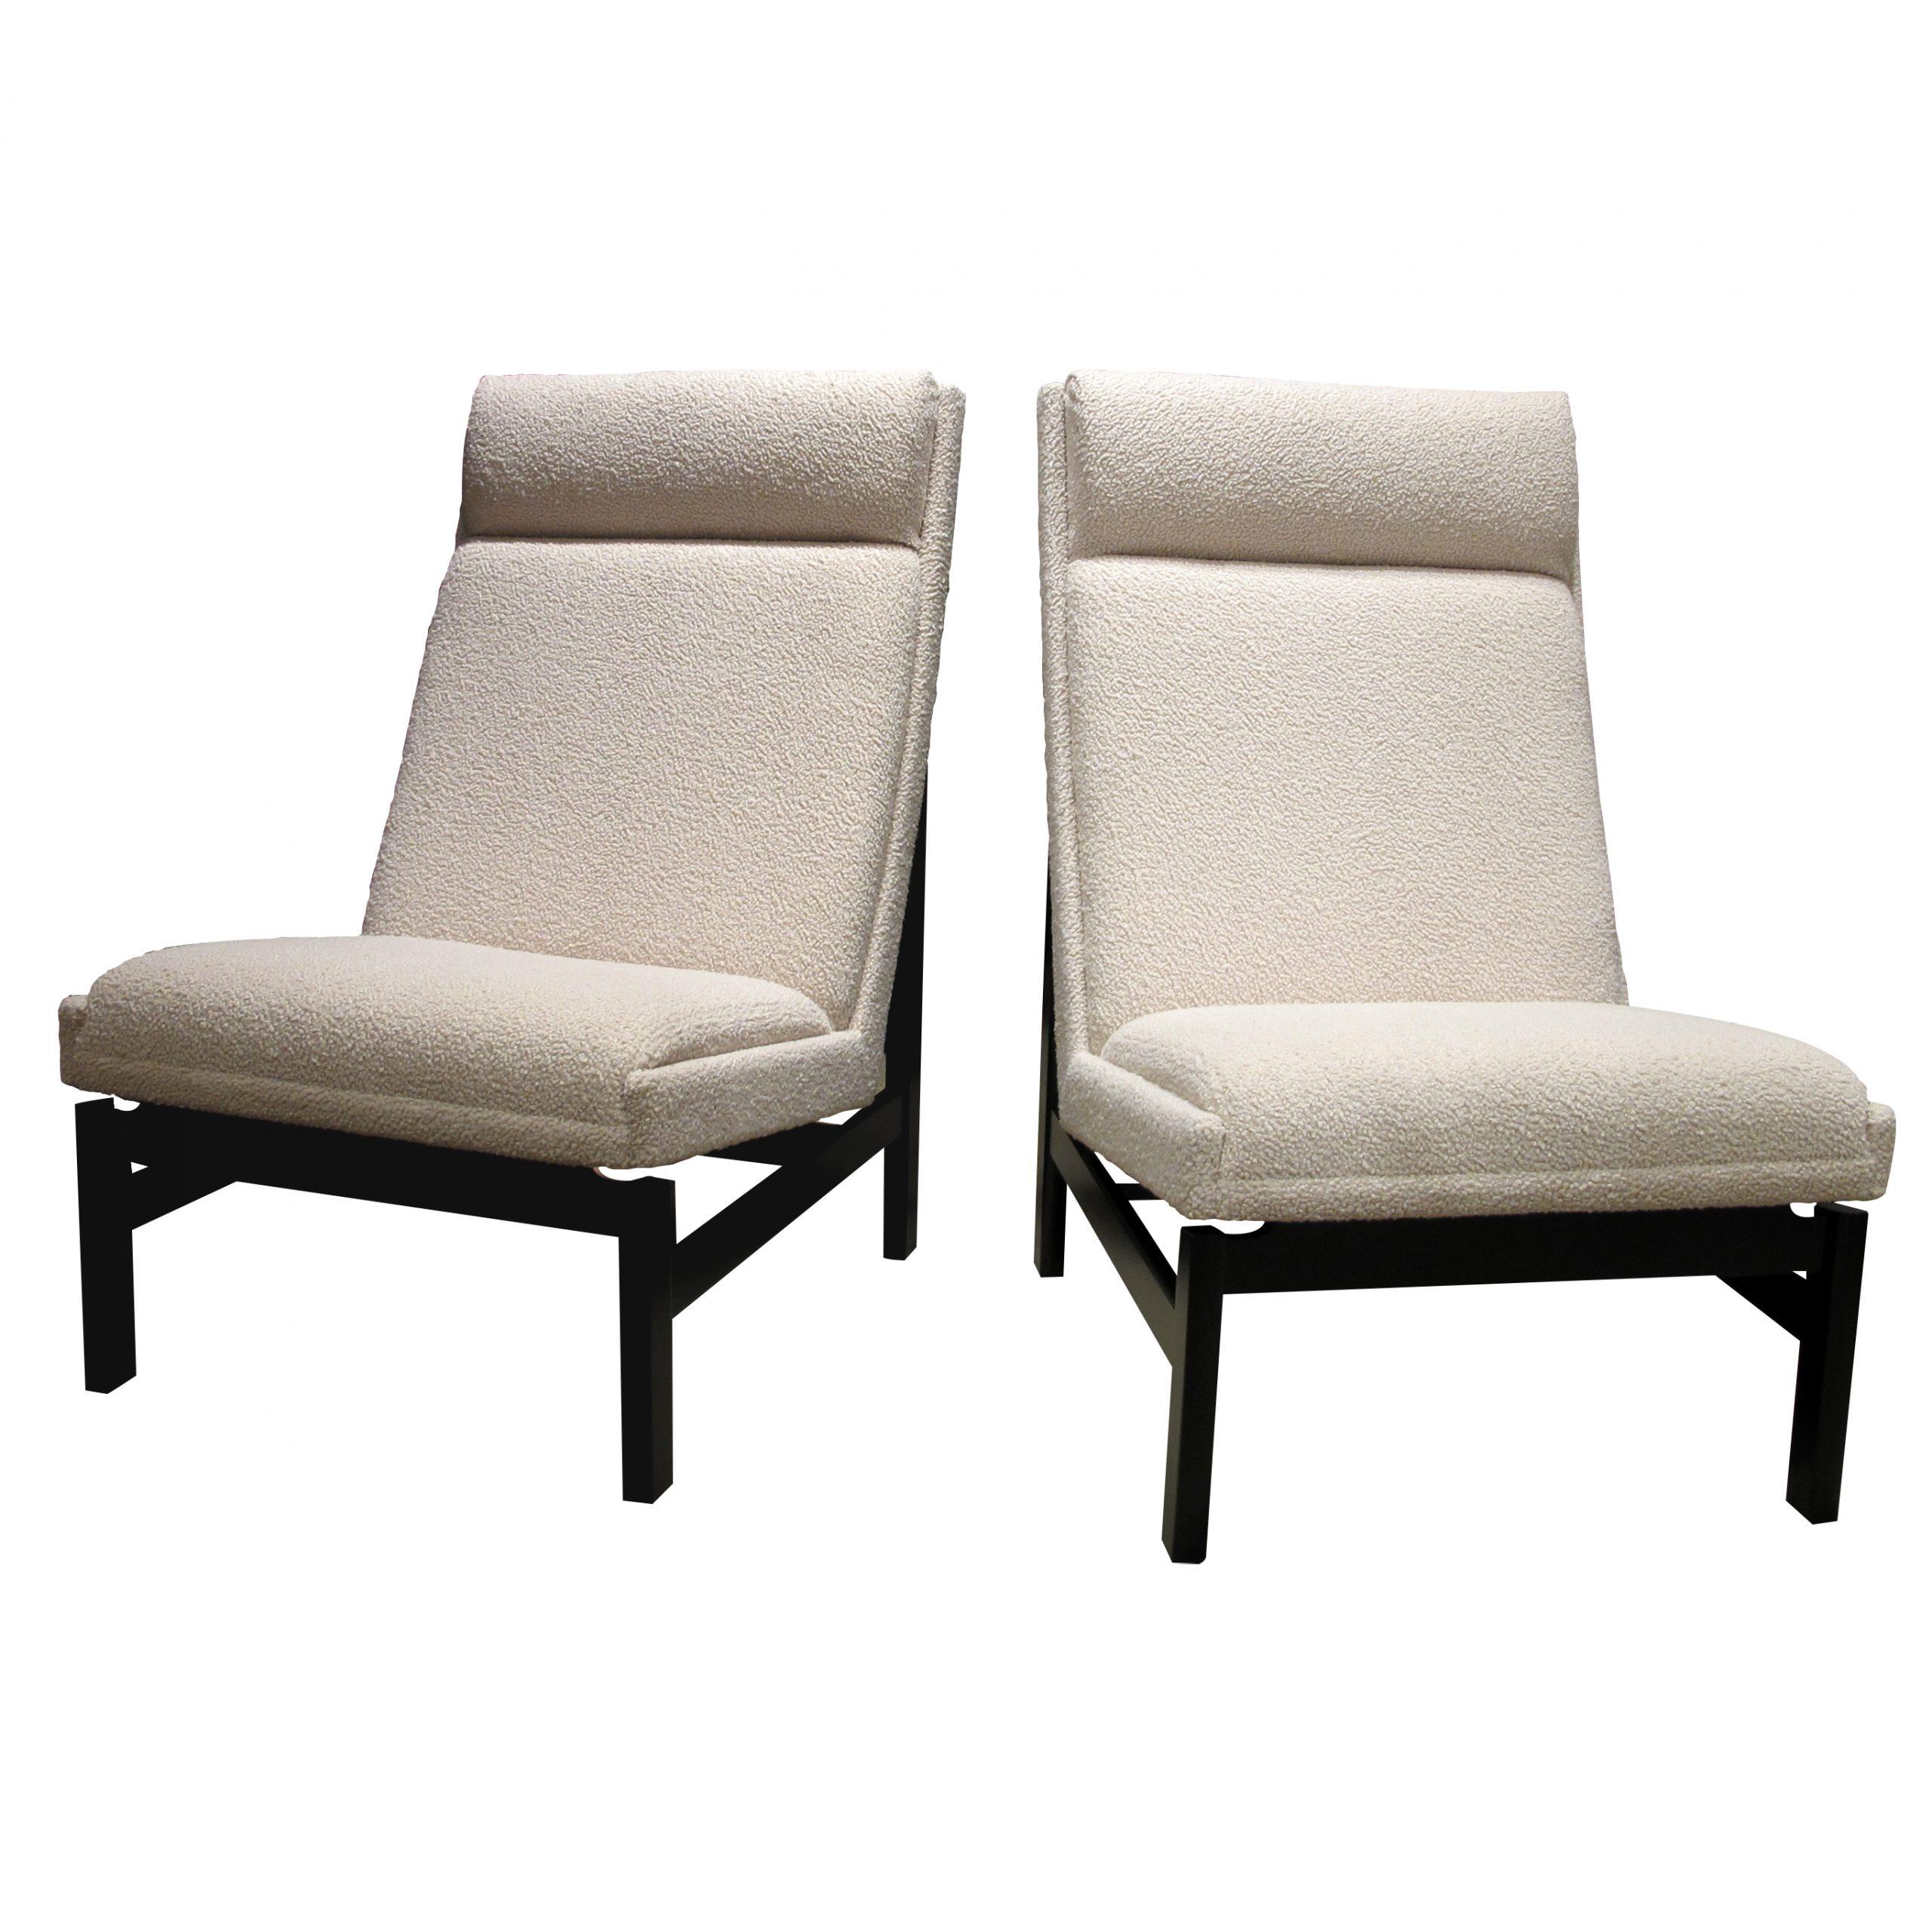 This is a very elegant comfortable and structural pair of 1960s Danish armchairs with the seat and backrest presented on a dark wooden frame highlighting the straight line and curves of the backrest and seat. These well-made armchairs have been